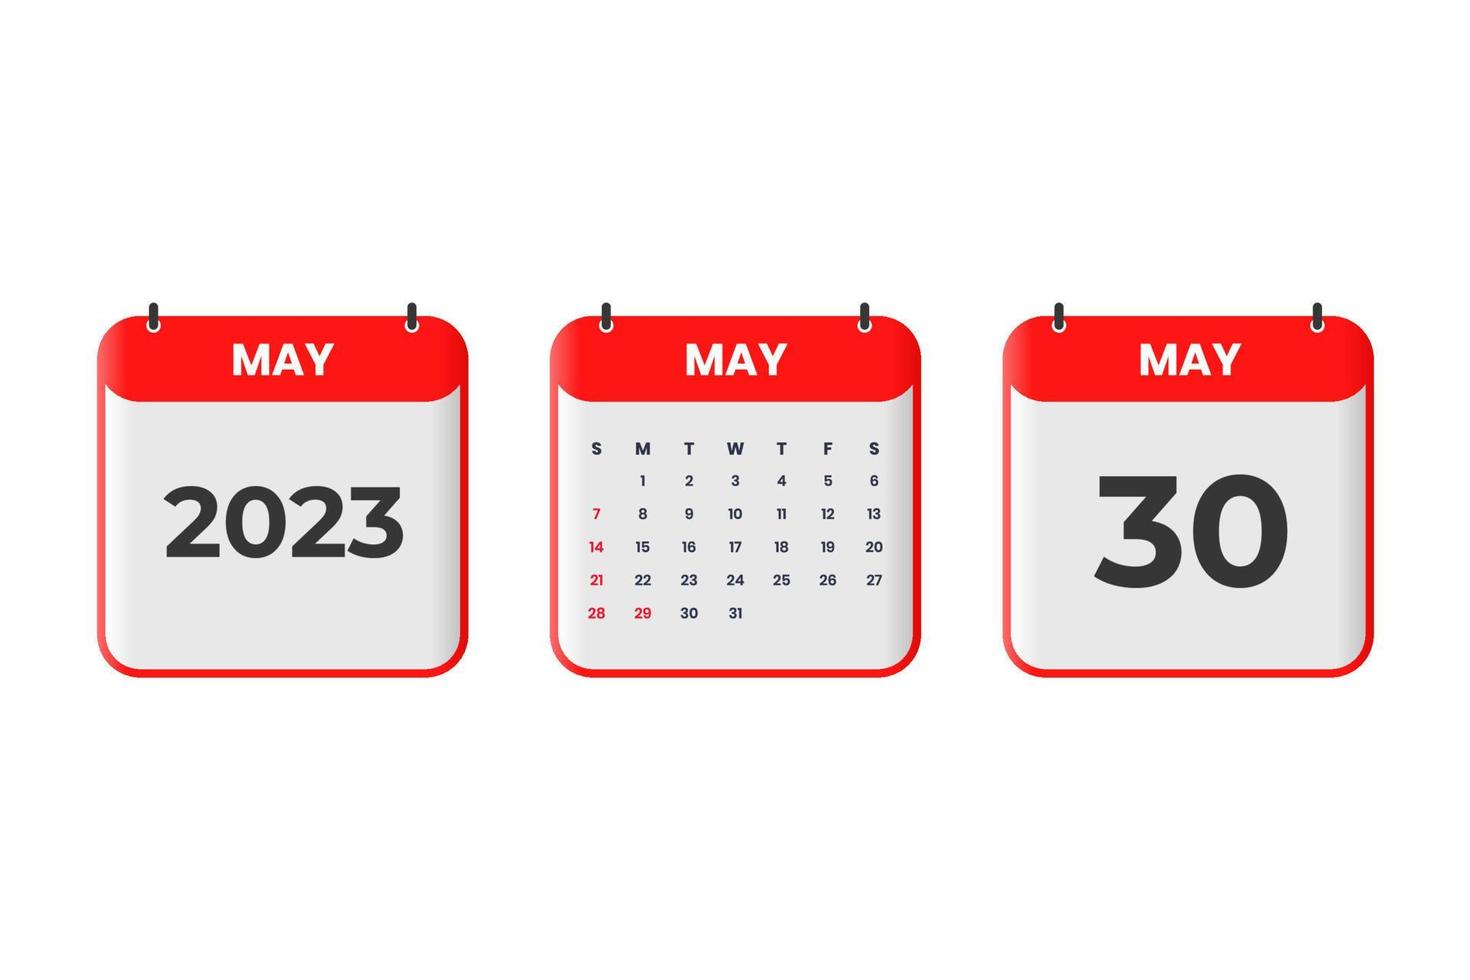 May 2023 calendar design. 30th May 2023 calendar icon for schedule, appointment, important date concept vector